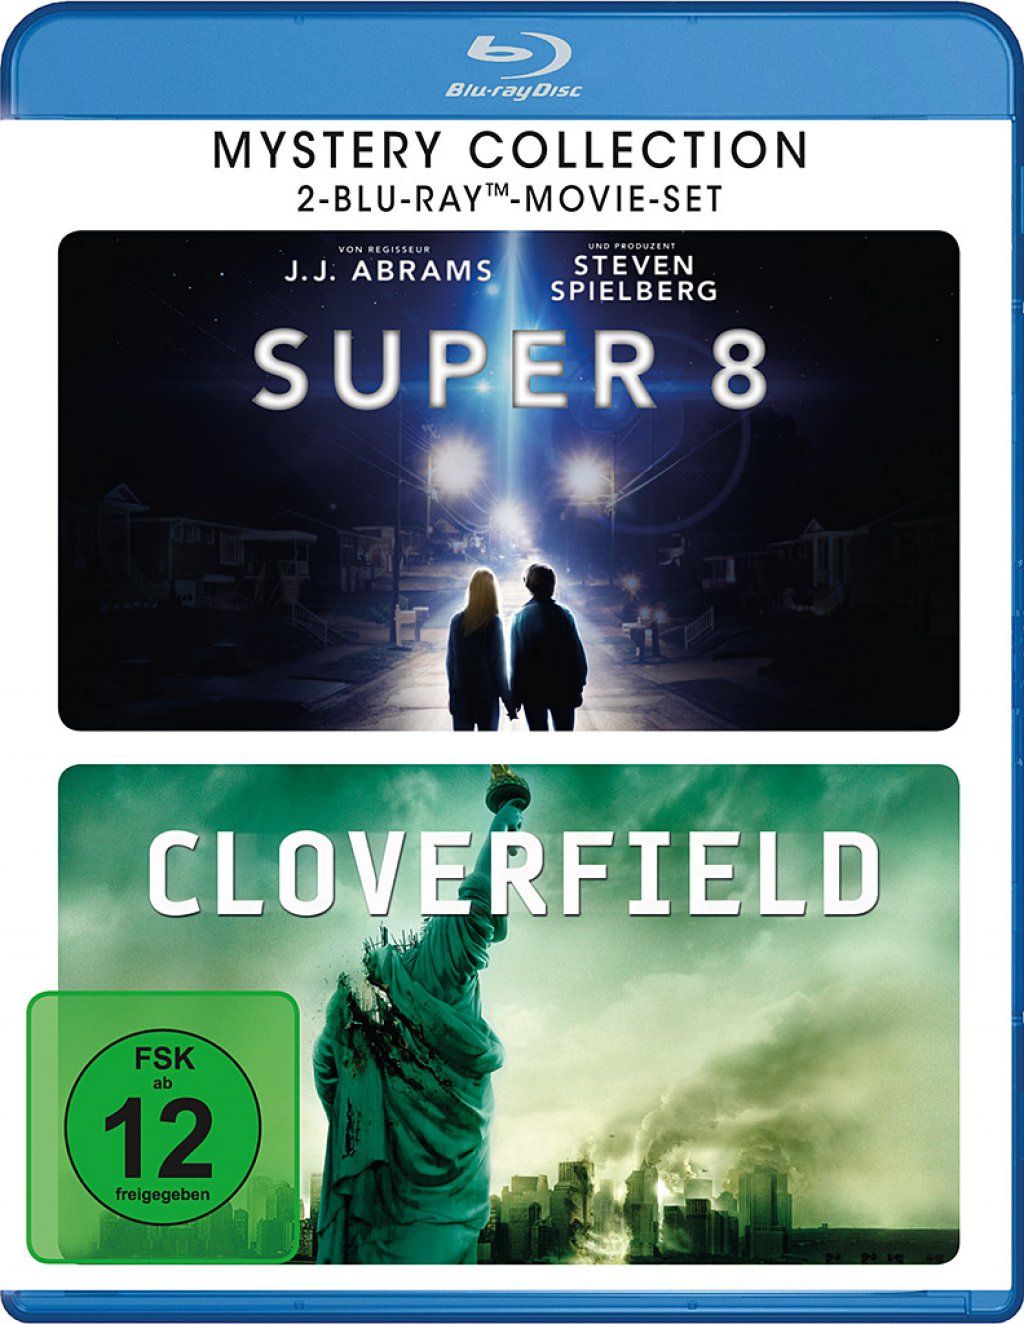 Super 8 / Cloverfield (Mystery Collection) (2 Discs) (BLURAY)